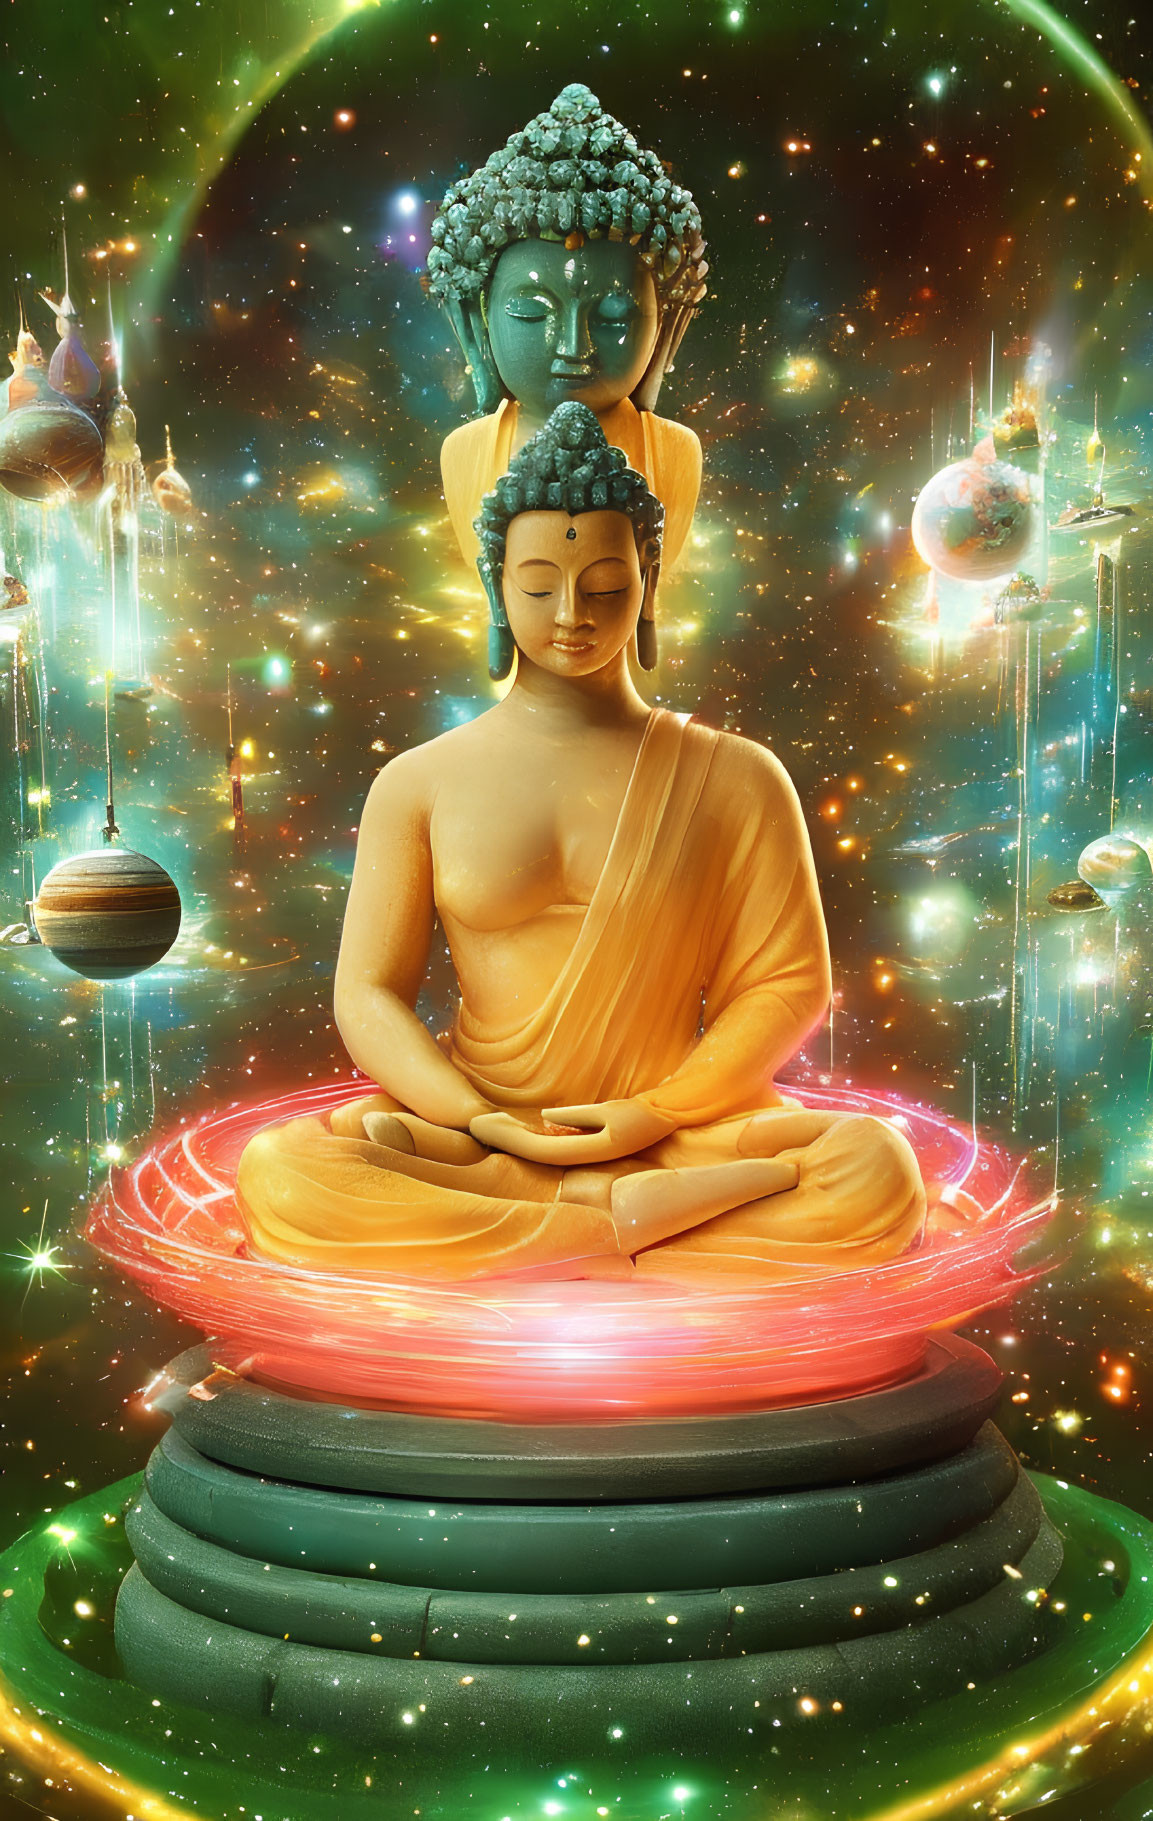 Two Buddha statues in meditation against cosmic backdrop